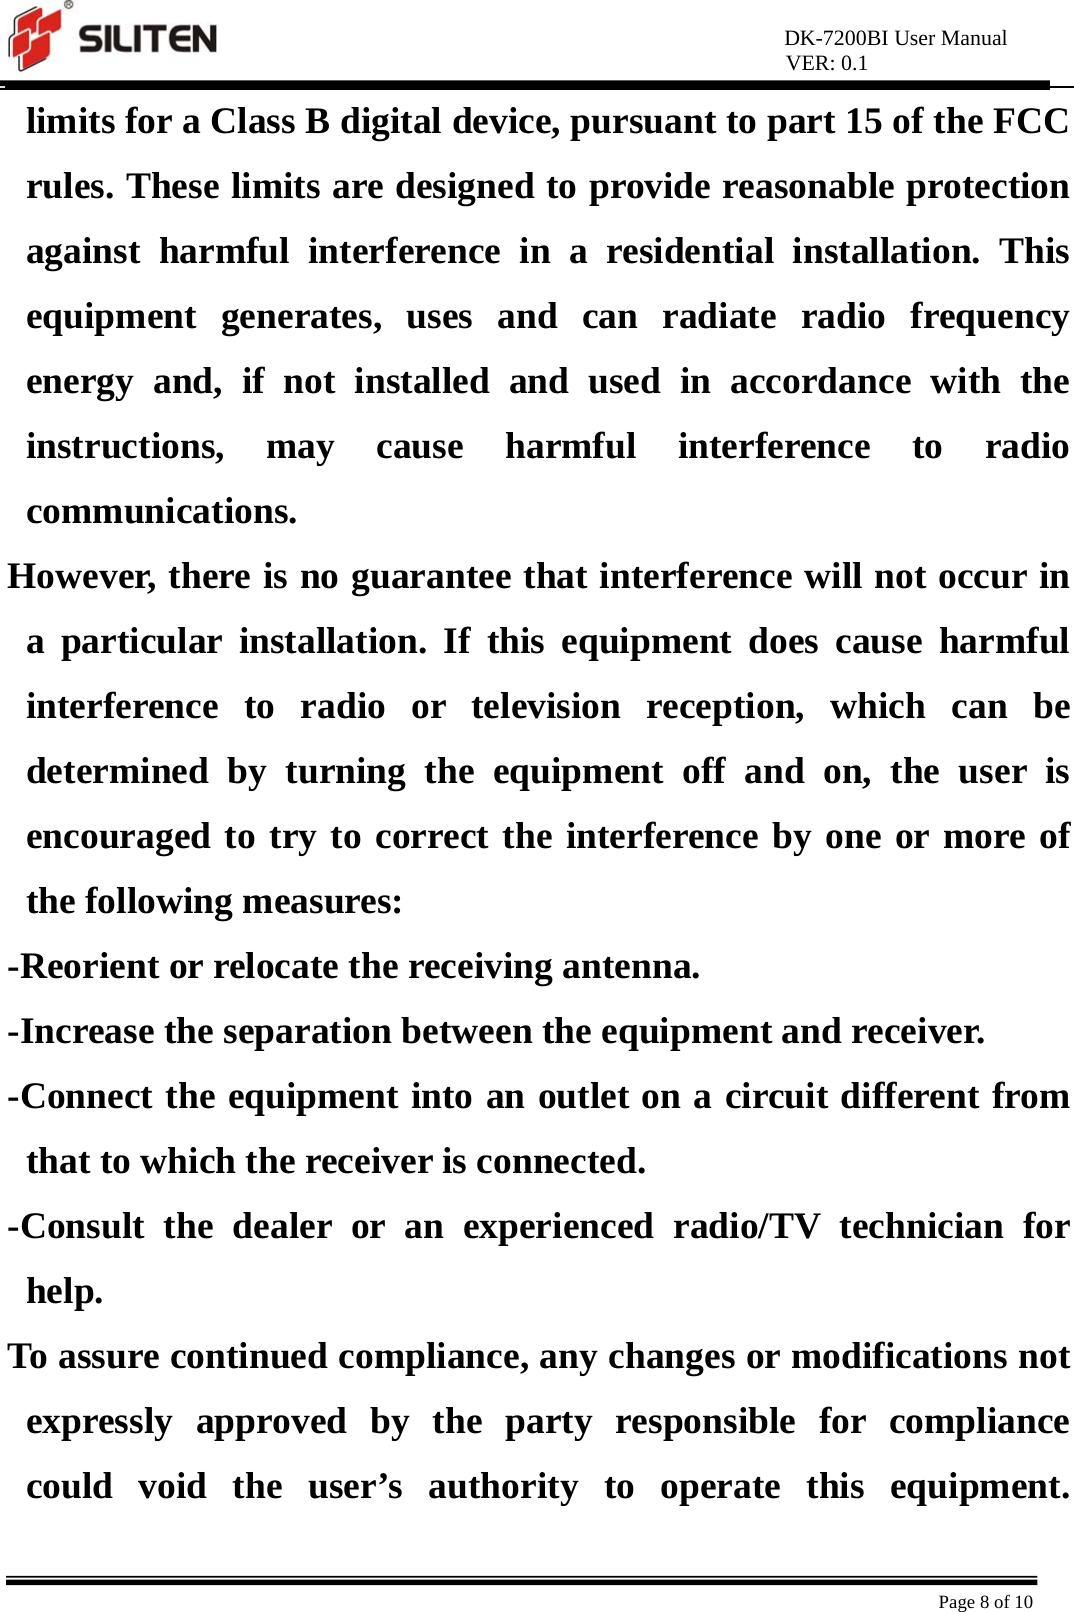 DK-7200BI User Manual VER: 0.1  Page 8 of 10 limits for a Class B digital device, pursuant to part 15 of the FCC rules. These limits are designed to provide reasonable protection against harmful interference in a residential installation. This equipment generates, uses and can radiate radio frequency energy and, if not installed and used in accordance with the instructions, may cause harmful interference to radio communications.  However, there is no guarantee that interference will not occur in a particular installation. If this equipment does cause harmful interference to radio or television reception, which can be determined by turning the equipment off and on, the user is encouraged to try to correct the interference by one or more of the following measures:   -Reorient or relocate the receiving antenna.   -Increase the separation between the equipment and receiver.   -Connect the equipment into an outlet on a circuit different from that to which the receiver is connected.   -Consult the dealer or an experienced radio/TV technician for help.  To assure continued compliance, any changes or modifications not expressly approved by the party responsible for compliance could void the user’s authority to operate this equipment. 